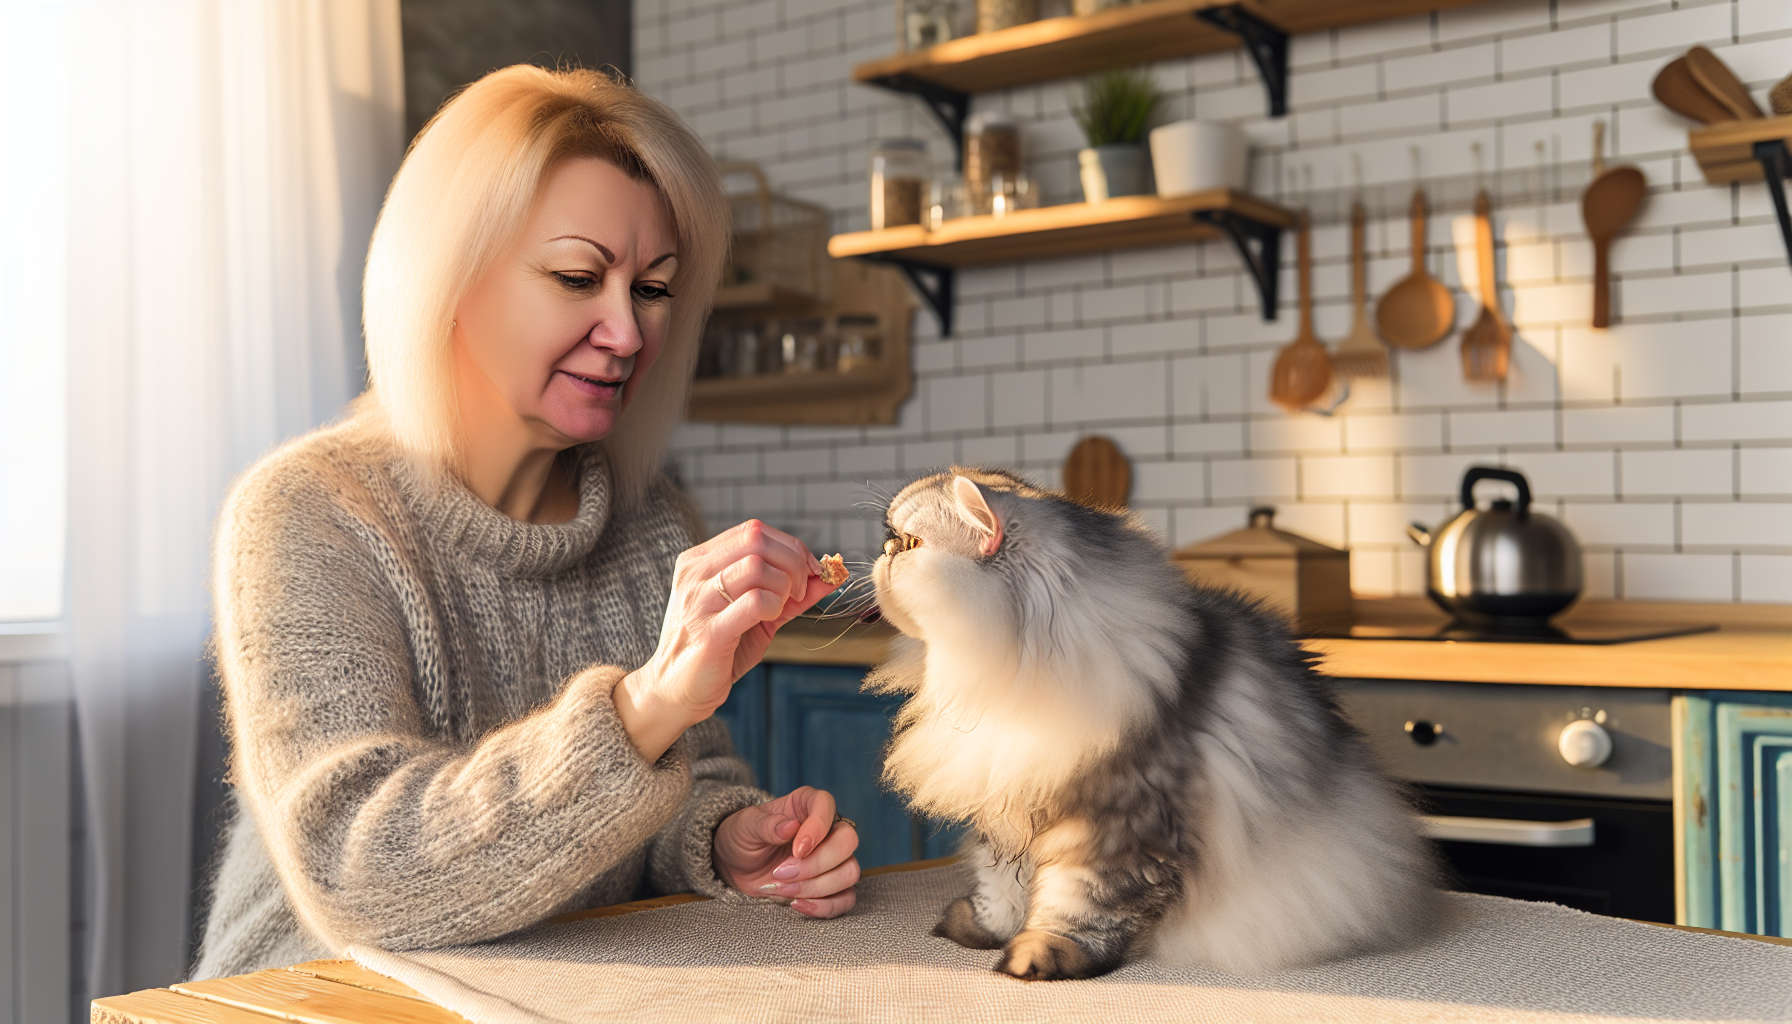 Cat interacting with owner during mealtime